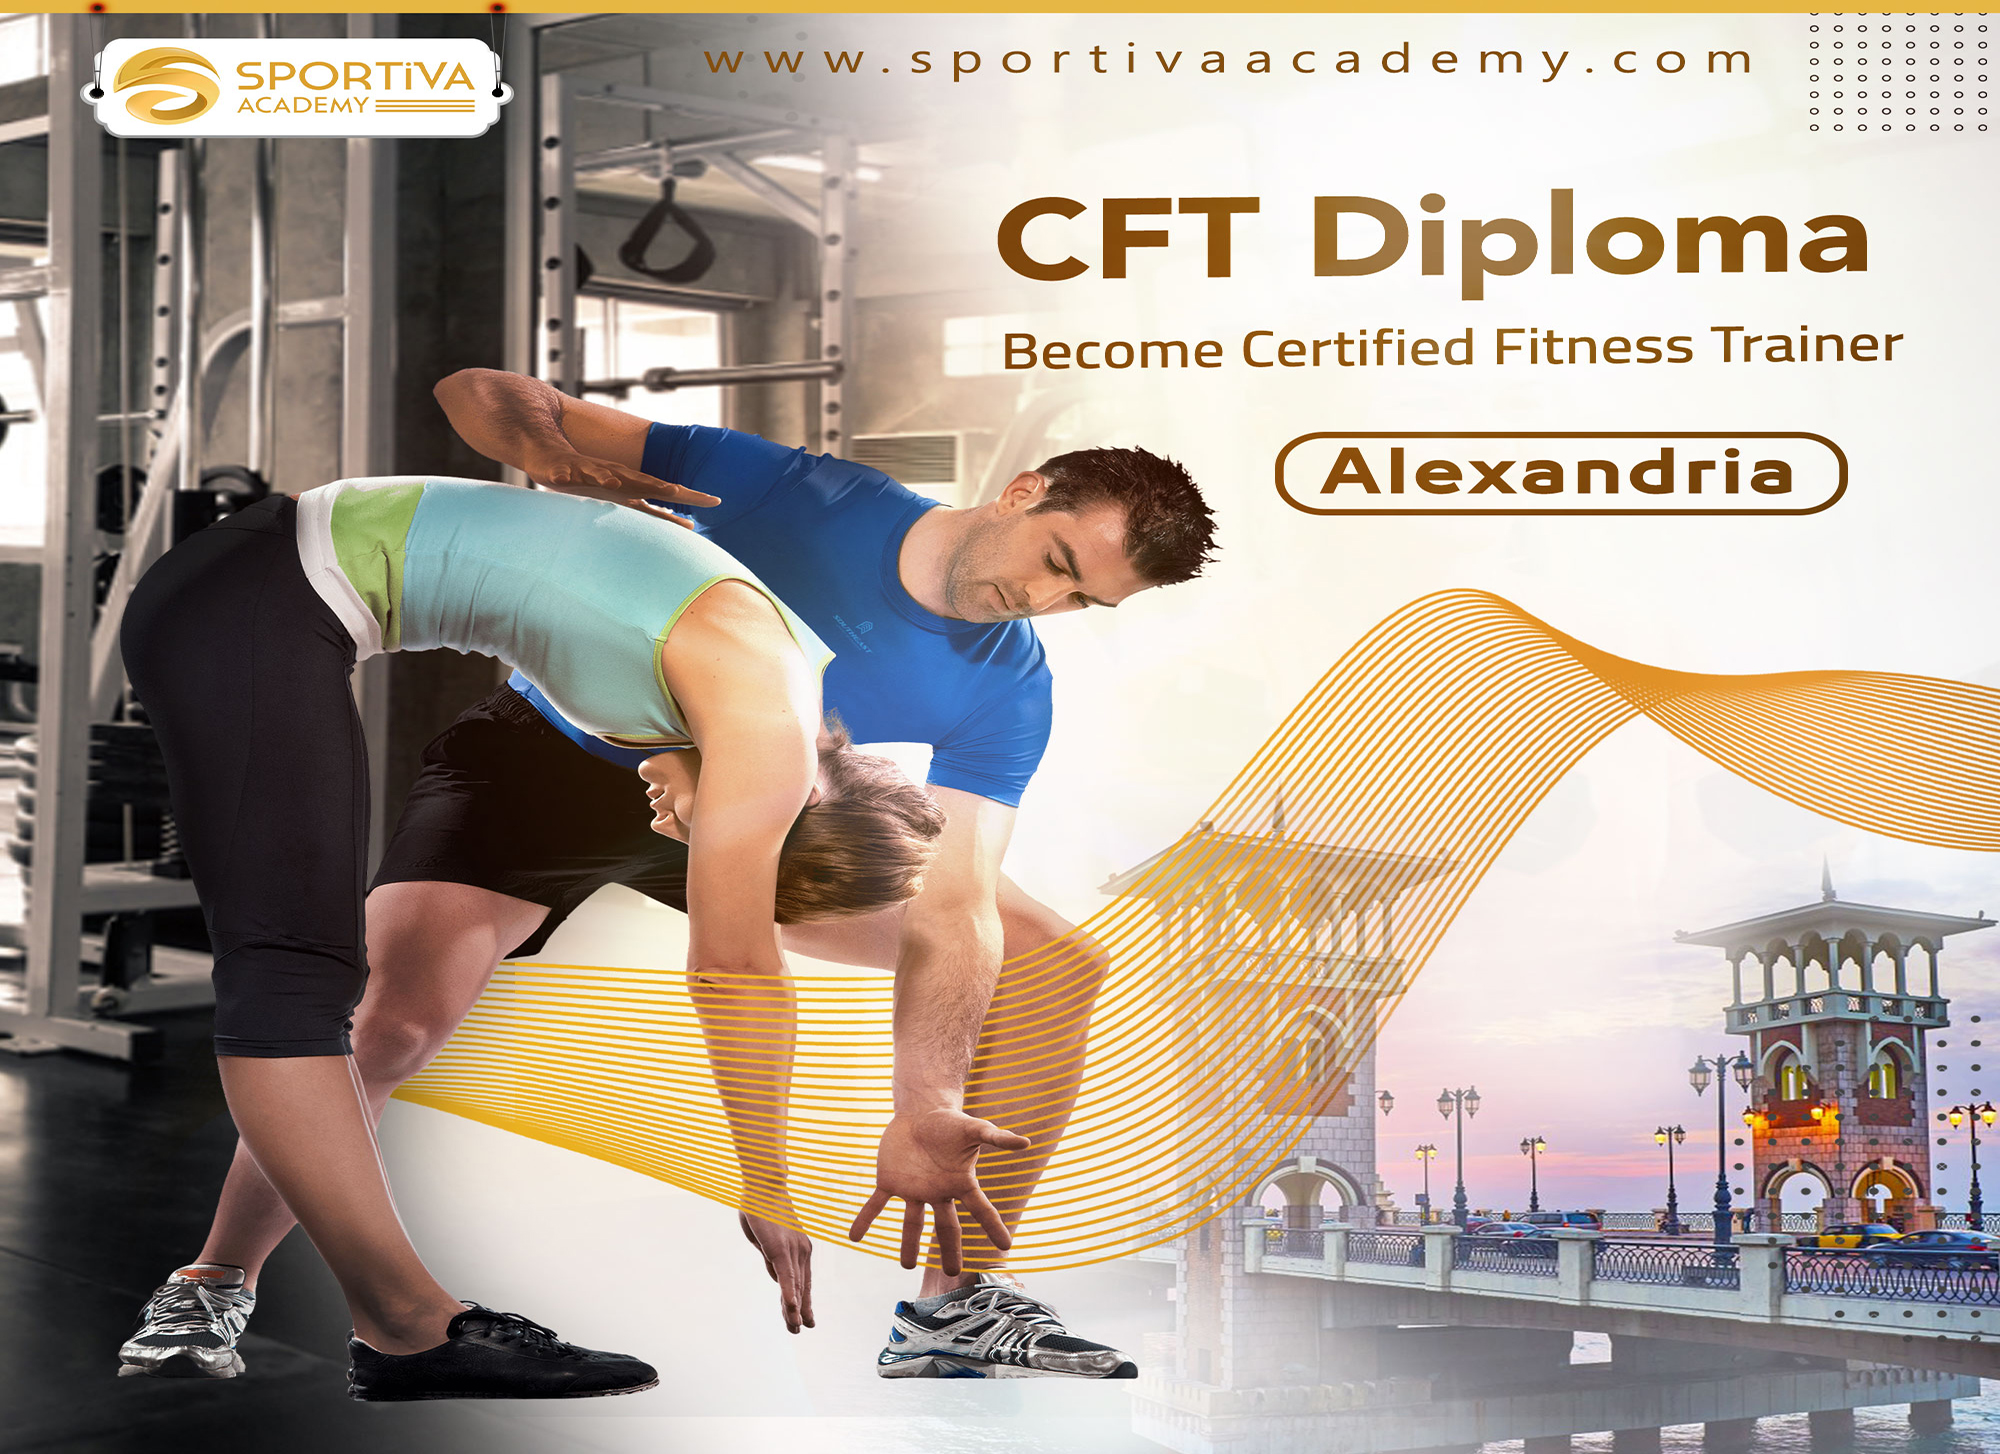 Personal trainer and fitness trainer diploma - Alexandria